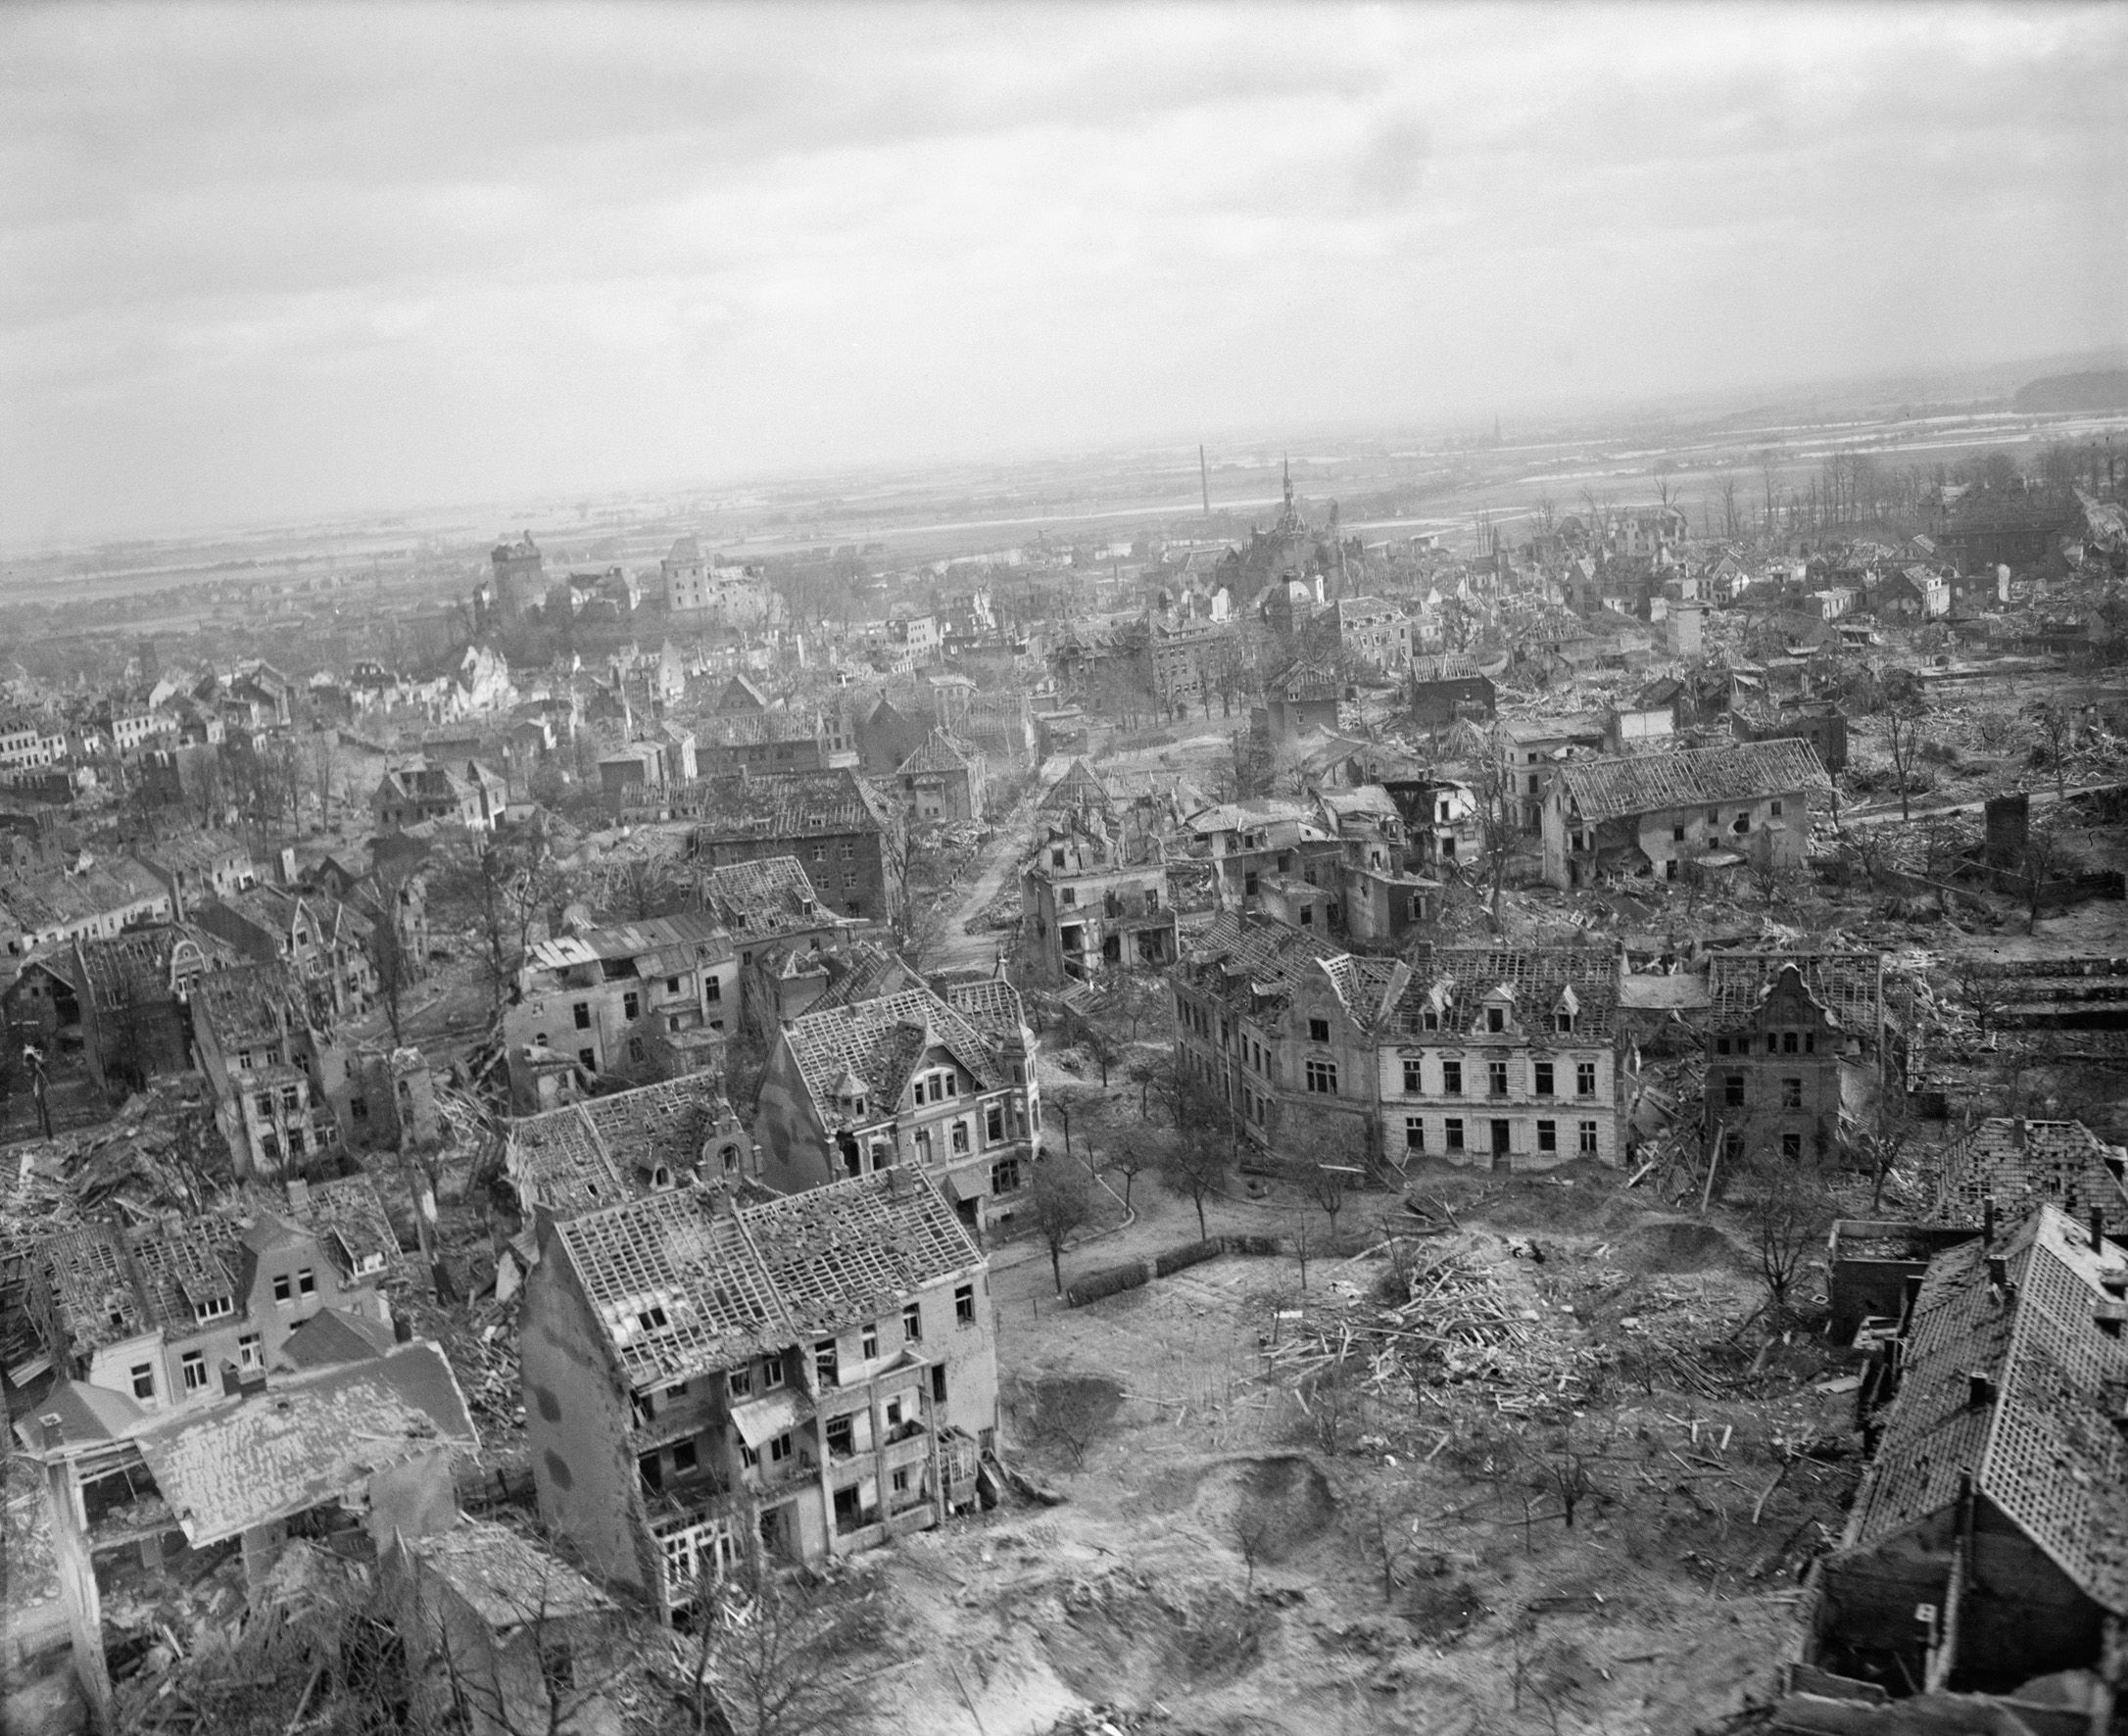 During preparations for the jump-off of Operation Veritable, Bomber Command of the British Royal Air Force launched heavy raids against German cities in the path of the anticipated advance toward the Ruhr. The German town of Cleve was hit by RAF bombers on February 7-8 with devastating results. Scarcely a single building remained undamaged after the raid.